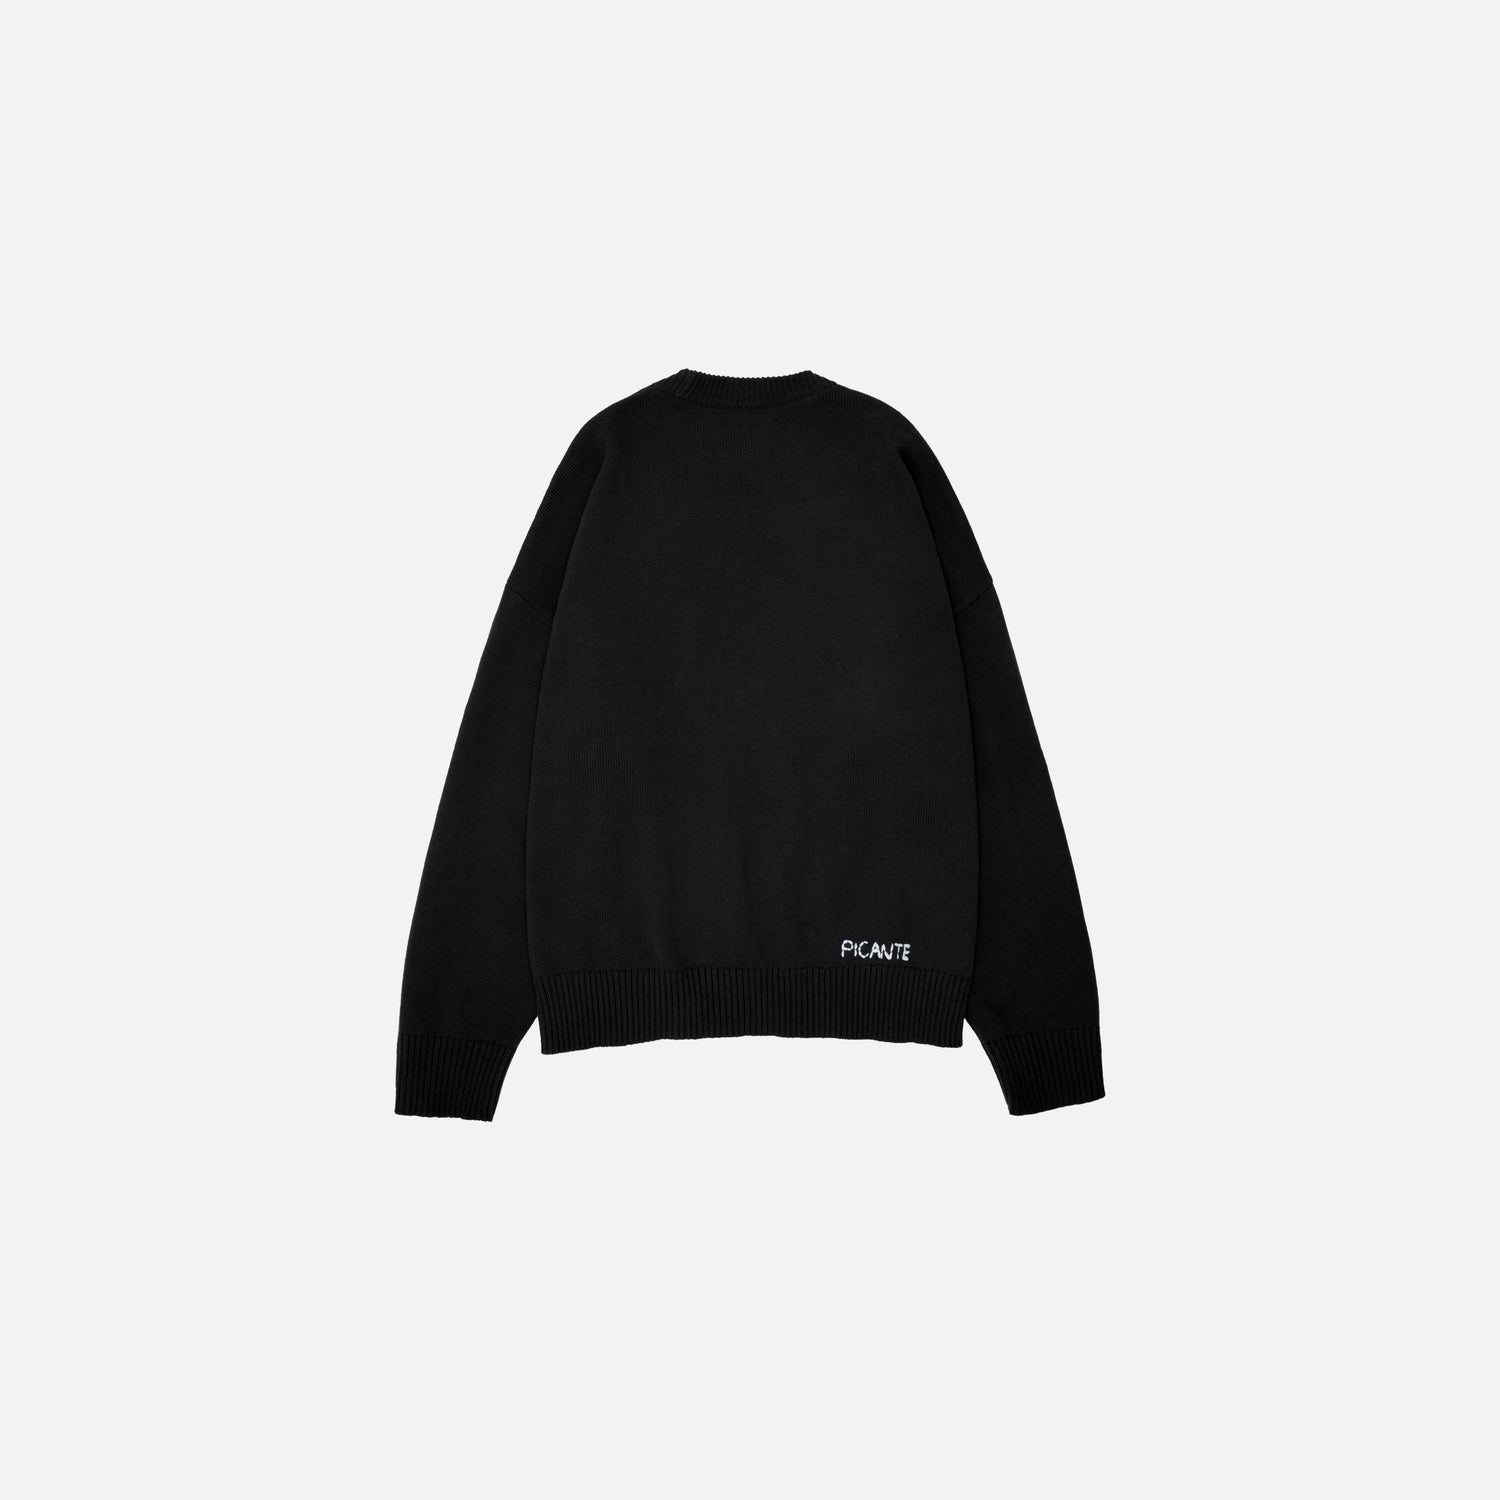 FORGE KNIT SWEATER BLACK